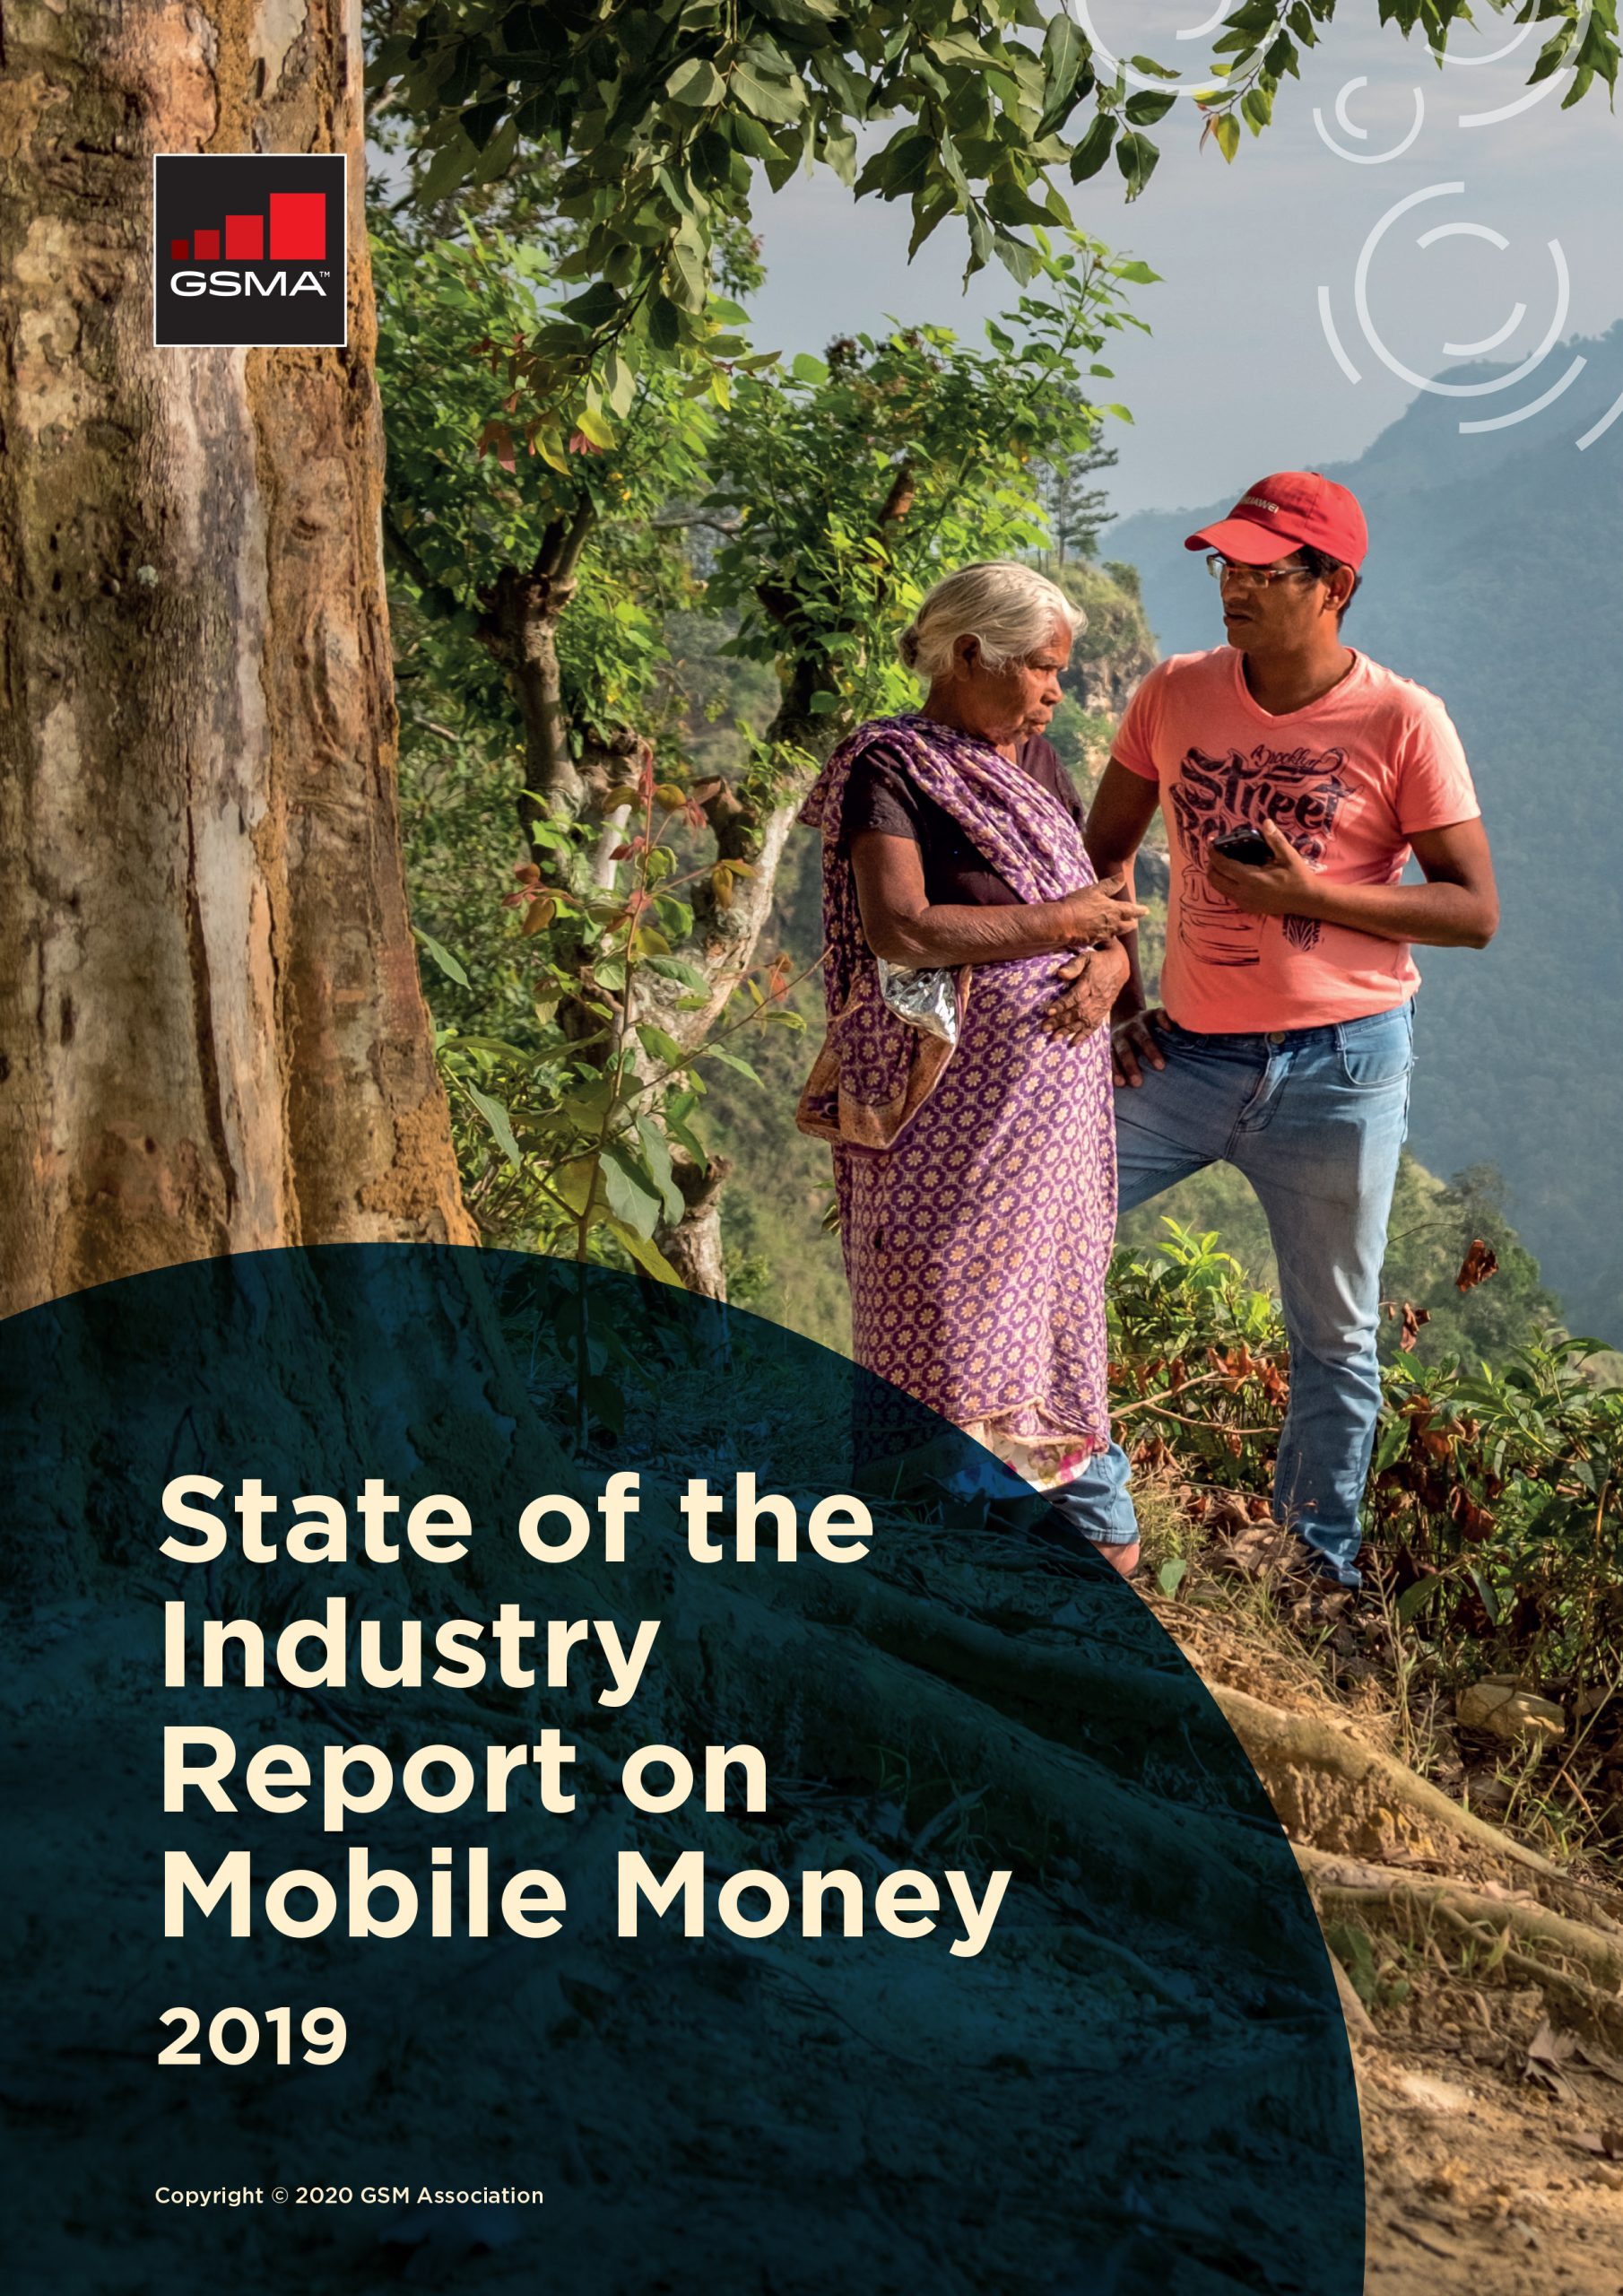 State of the Industry Report on Mobile Money 2019 image